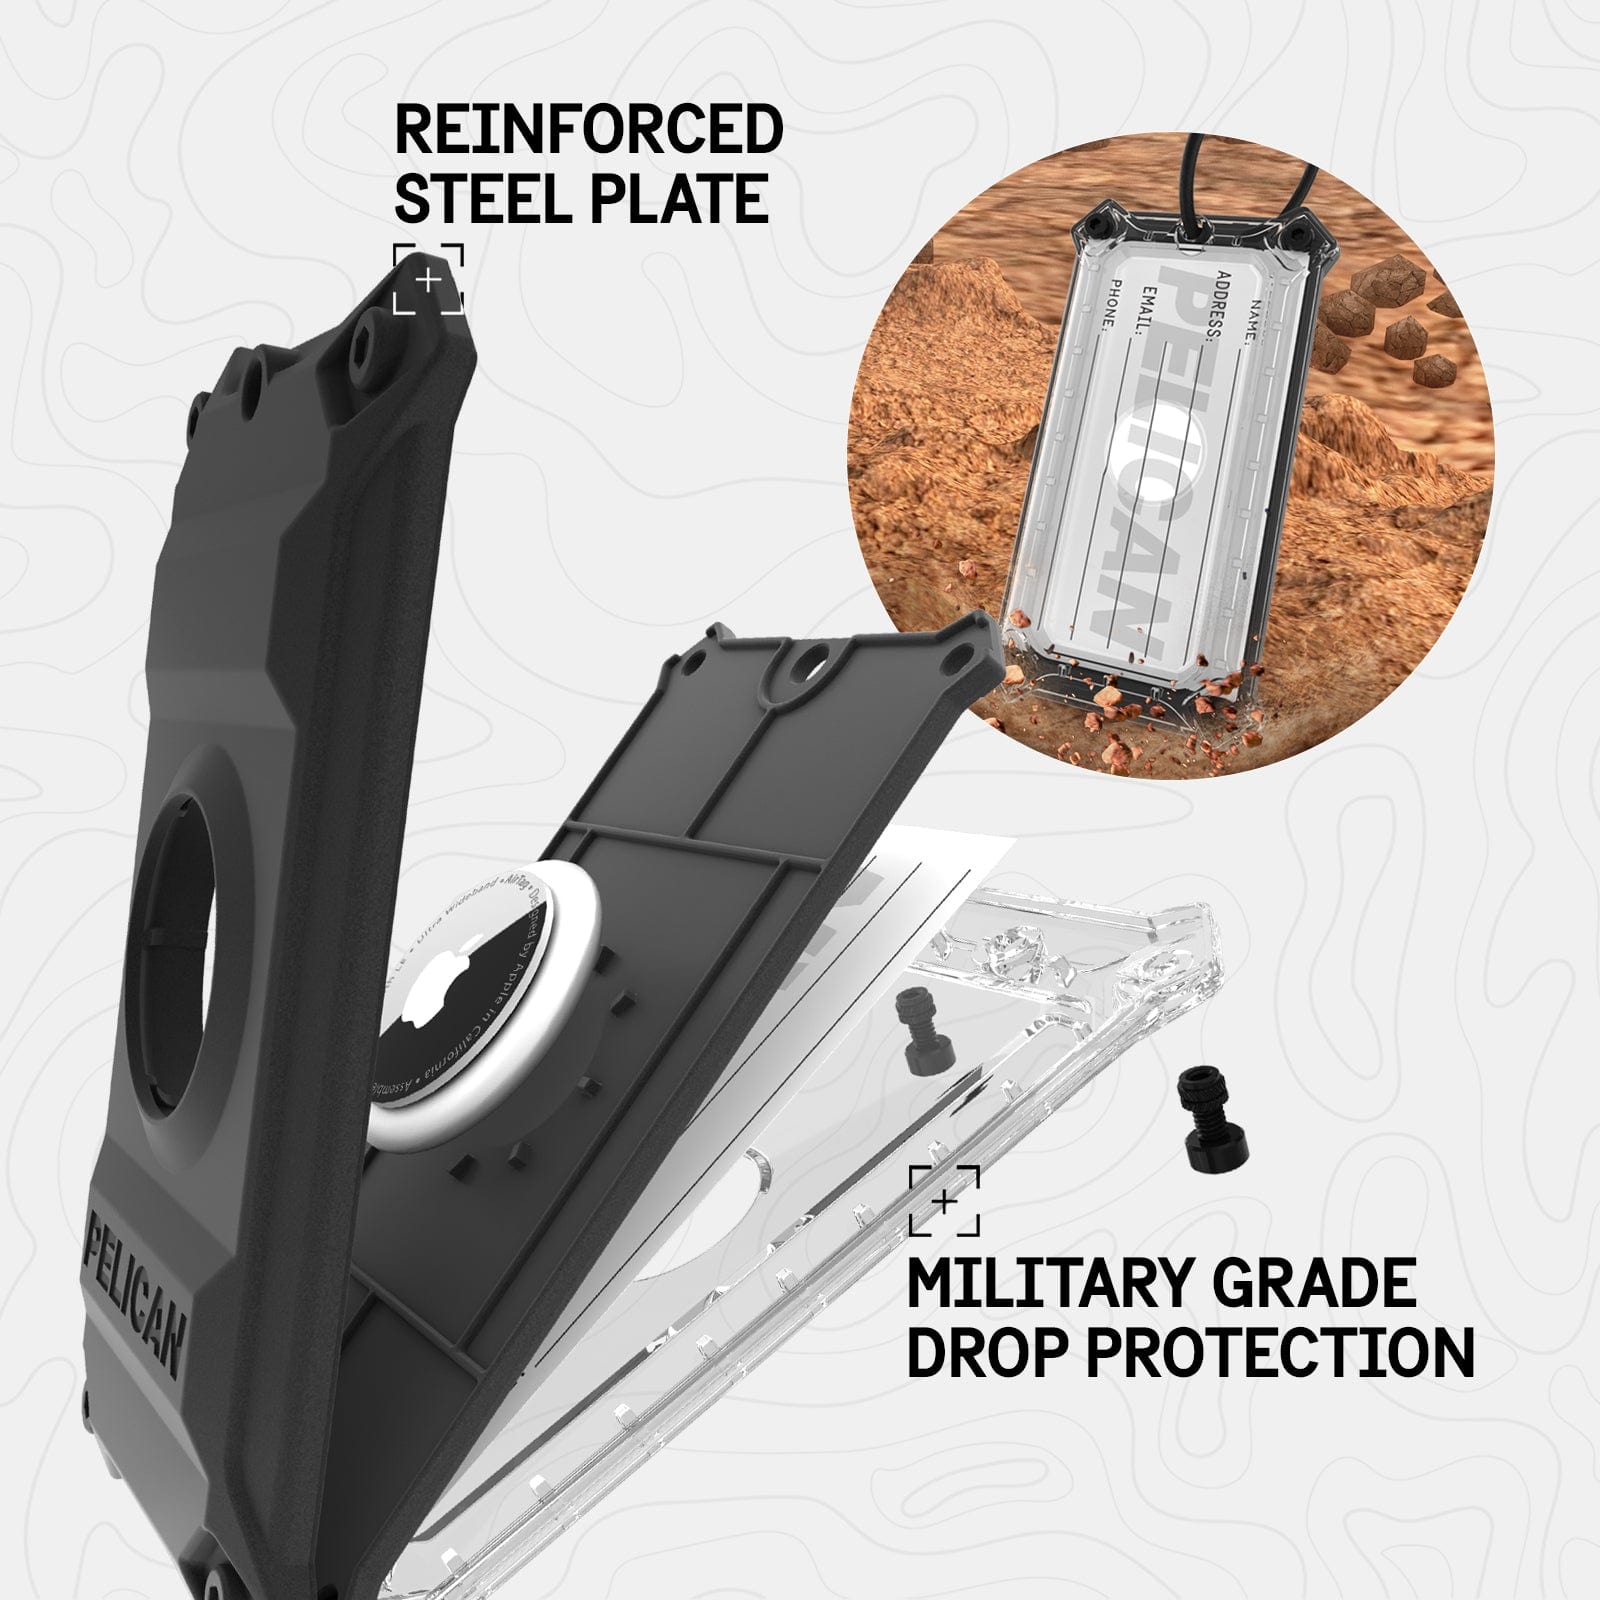 REINFORCED STEEL PLATE. MILITARY GRADE DROP PROTECTION. 